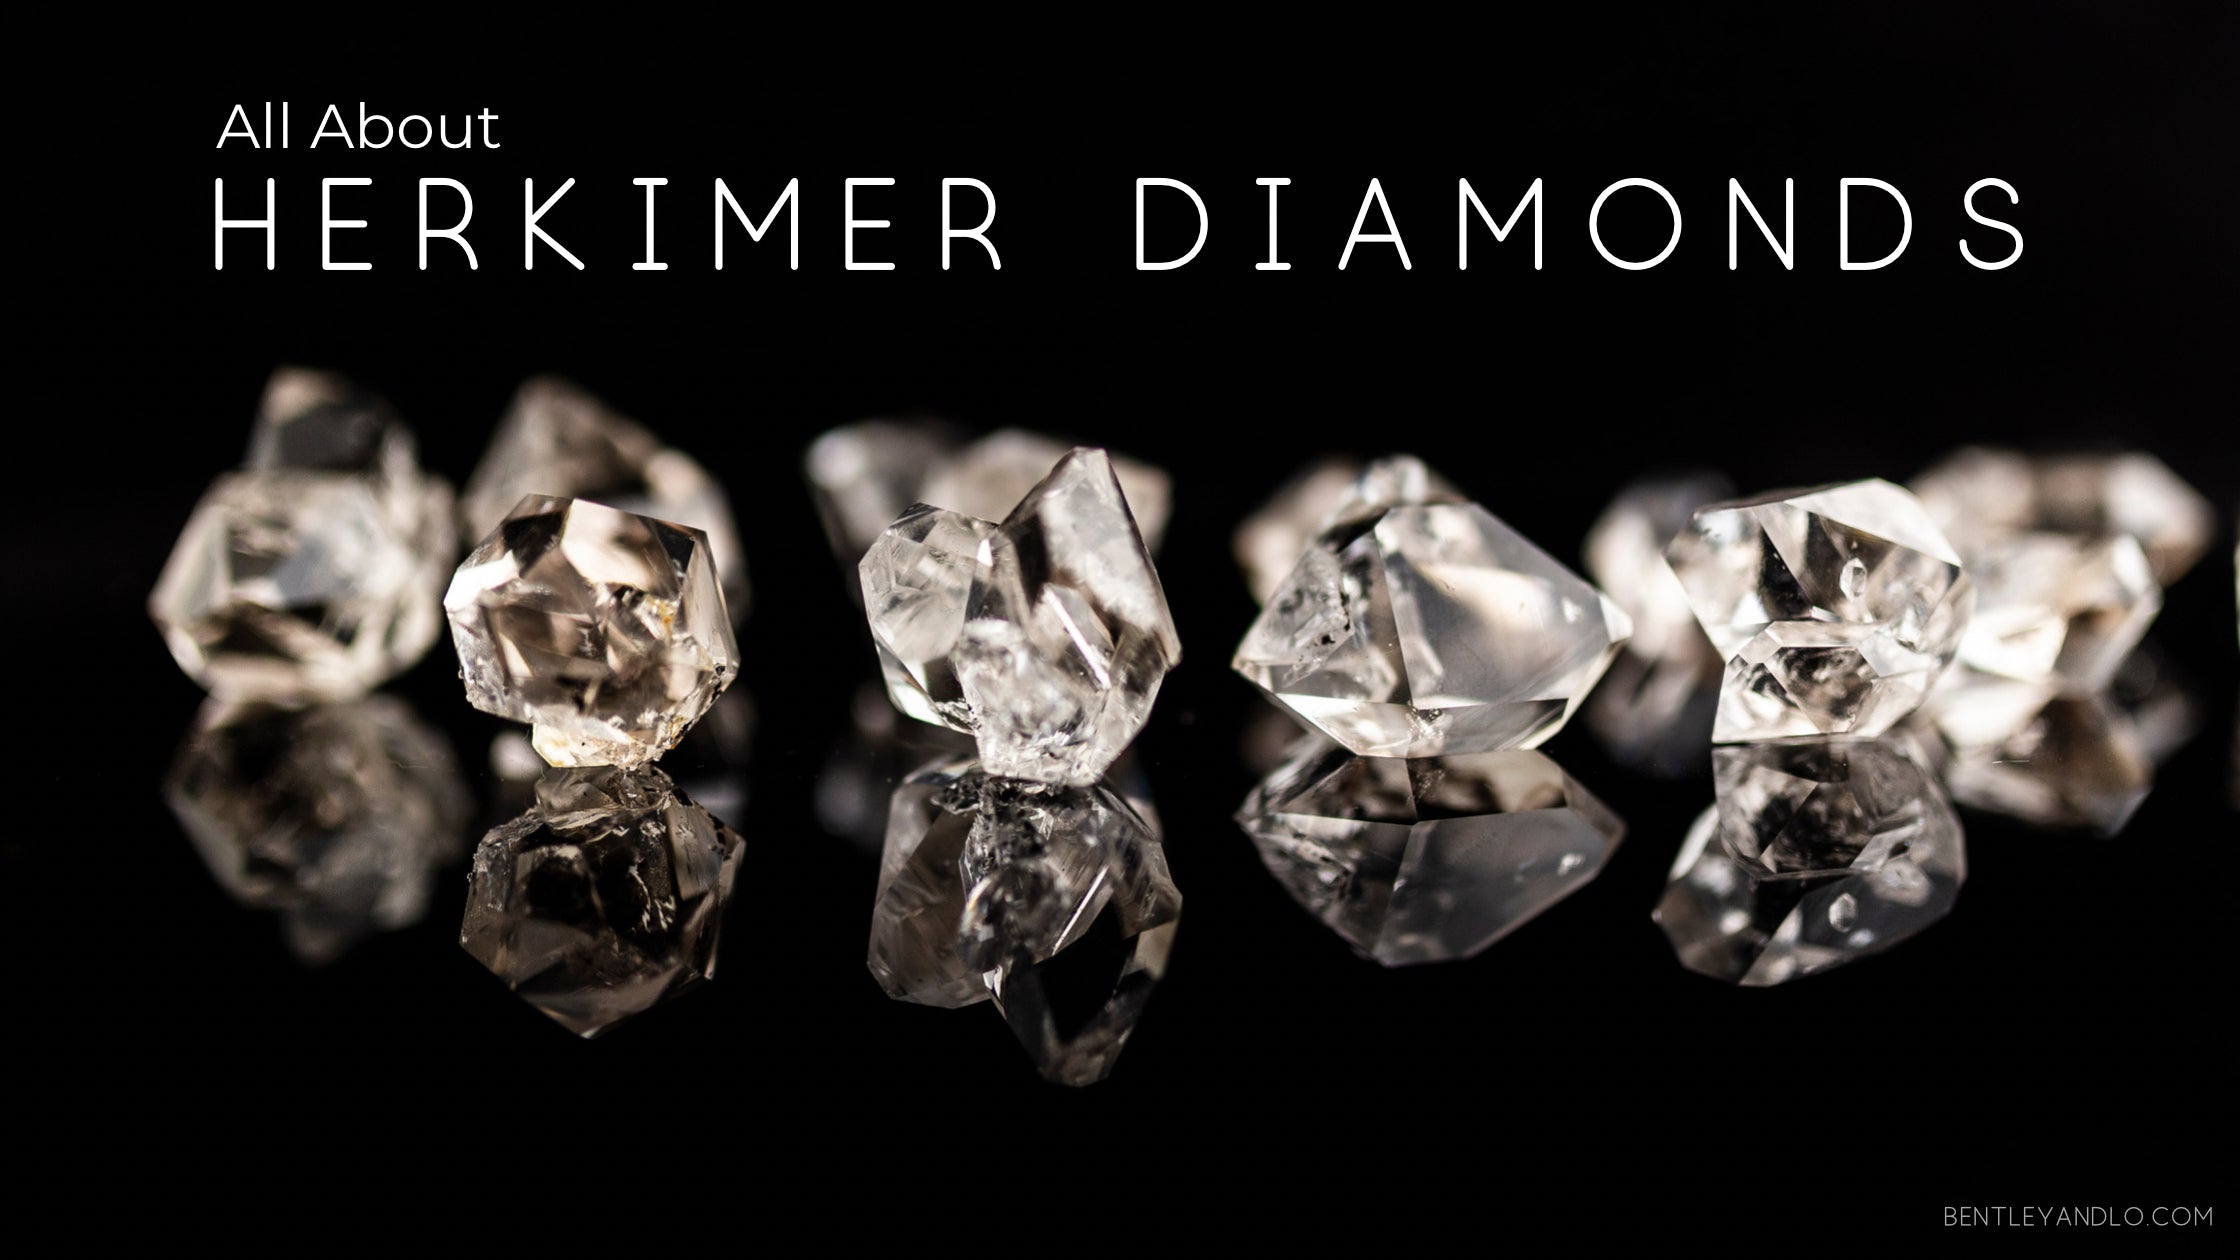 All About The Herkimer Diamond